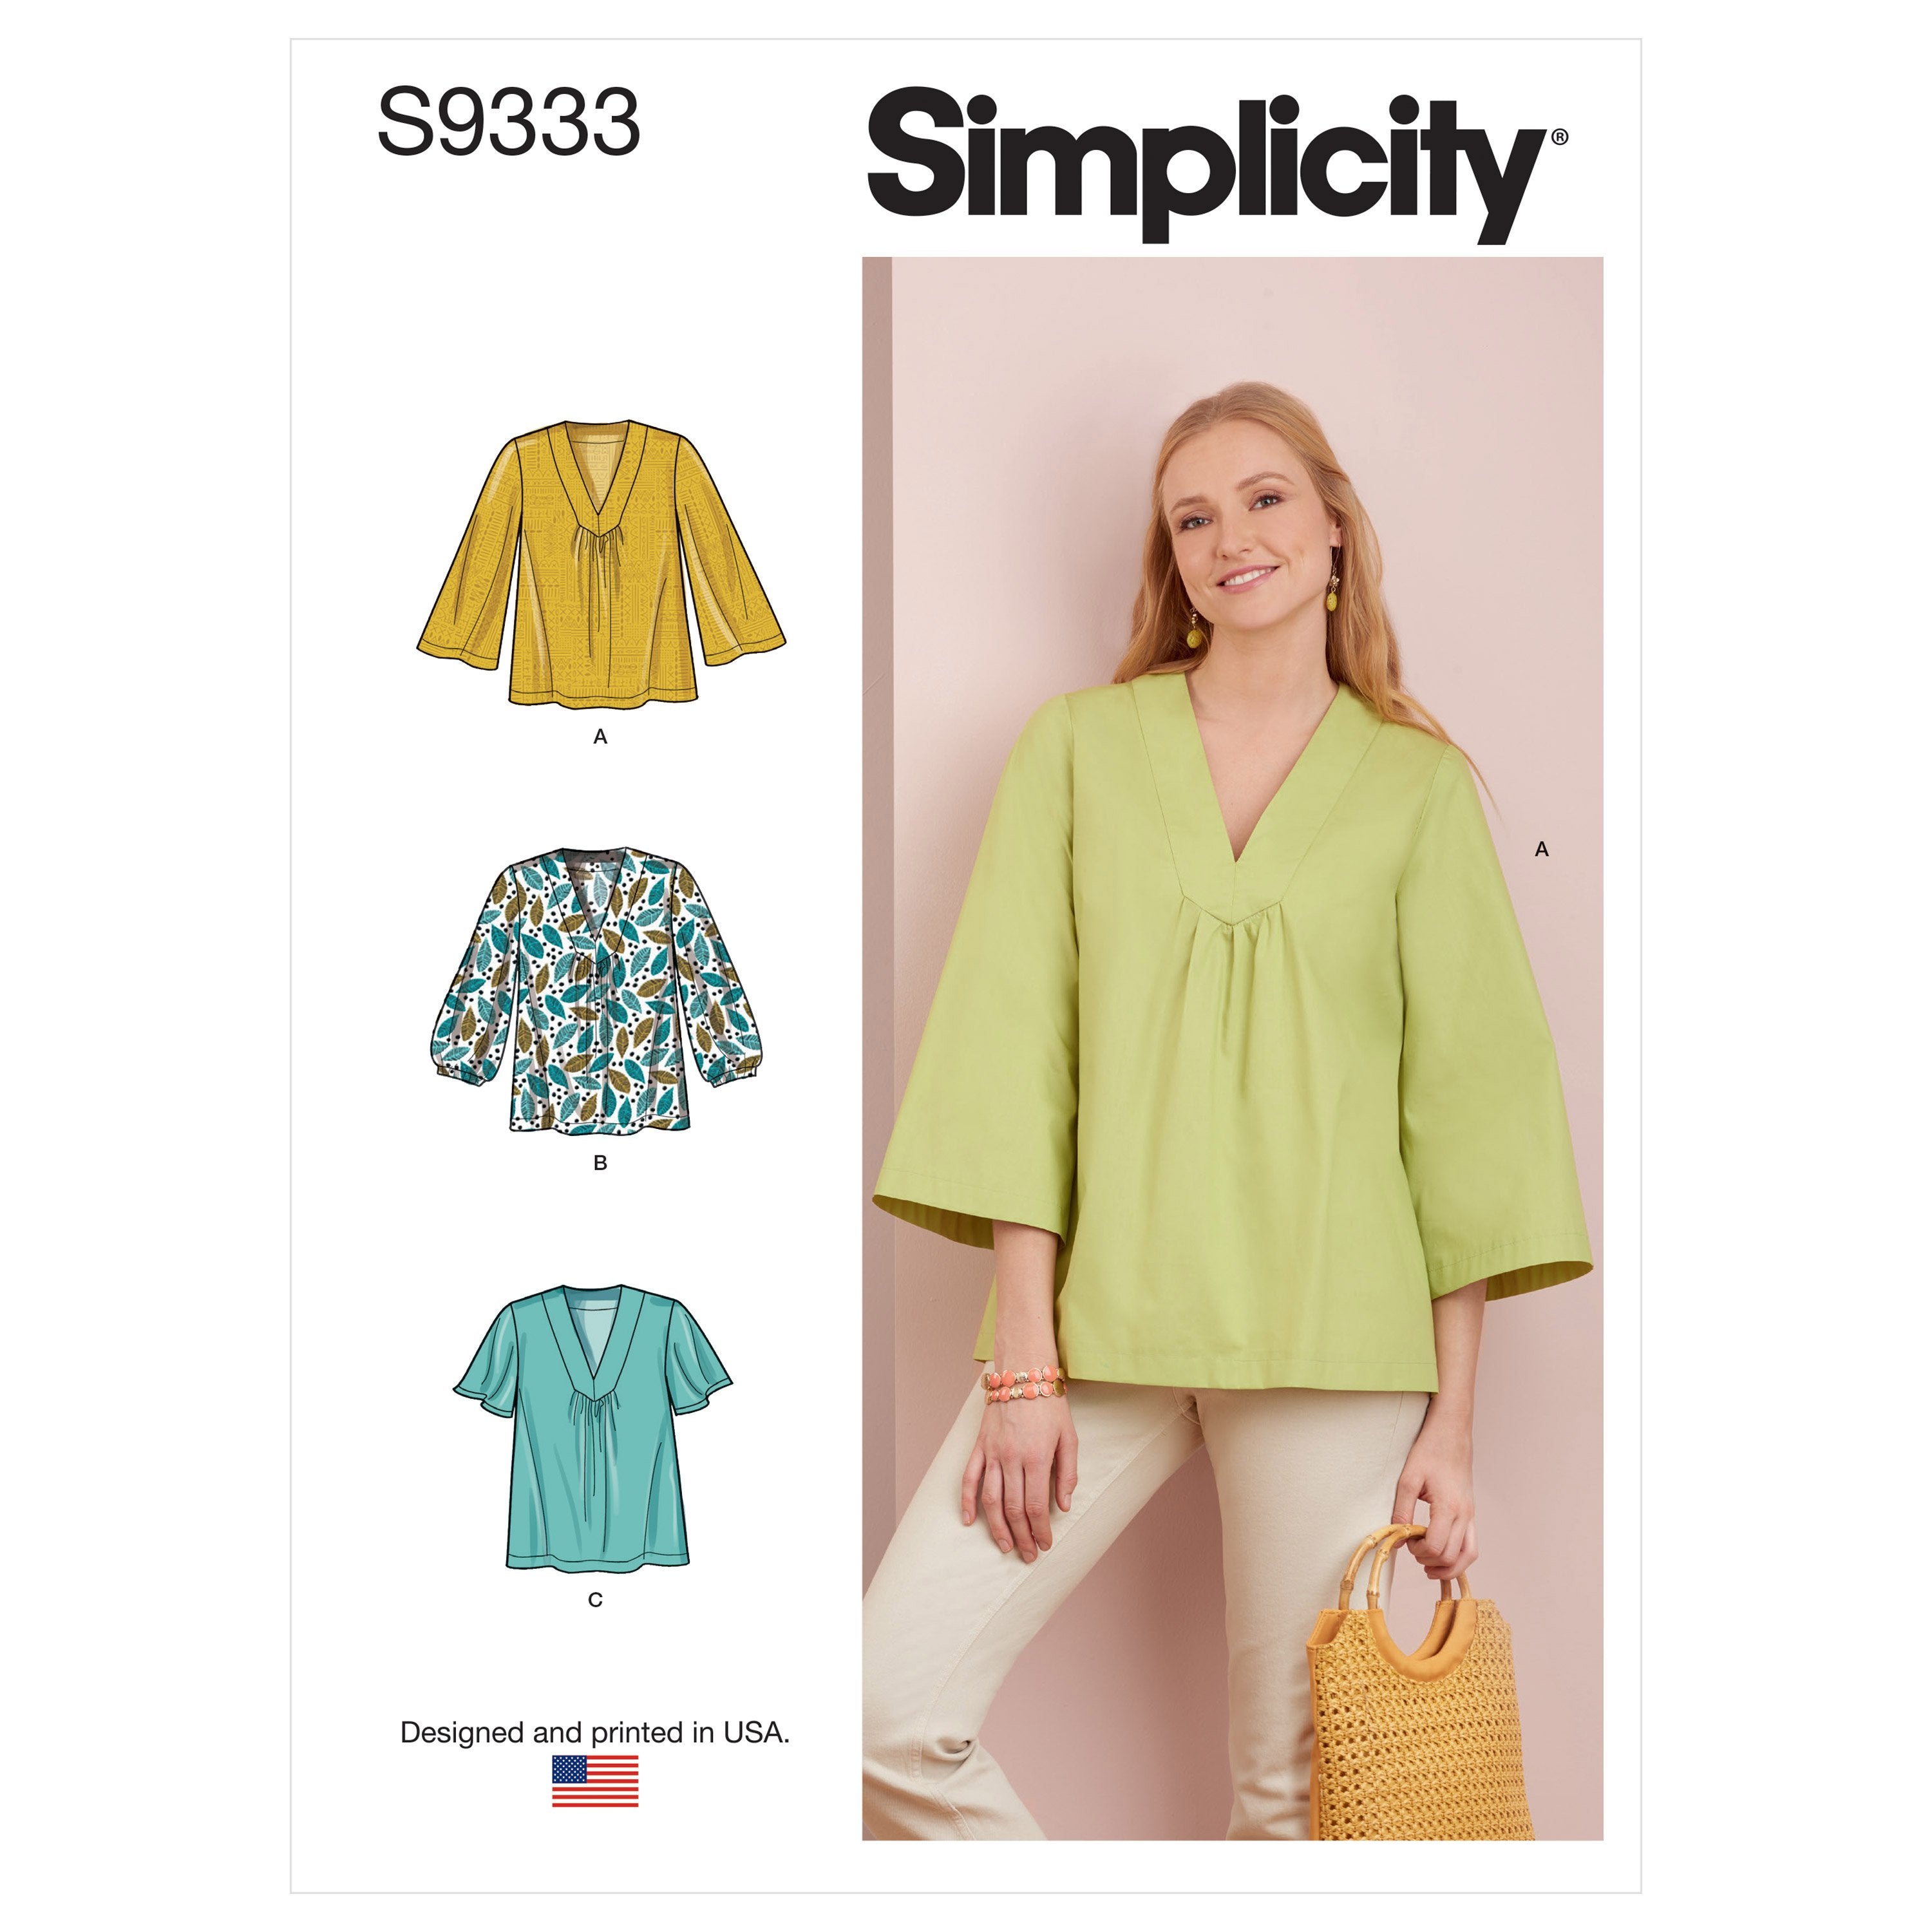 Simplicity Sewing Pattern S9333 Misses' Top with Sleeve Variations from Jaycotts Sewing Supplies